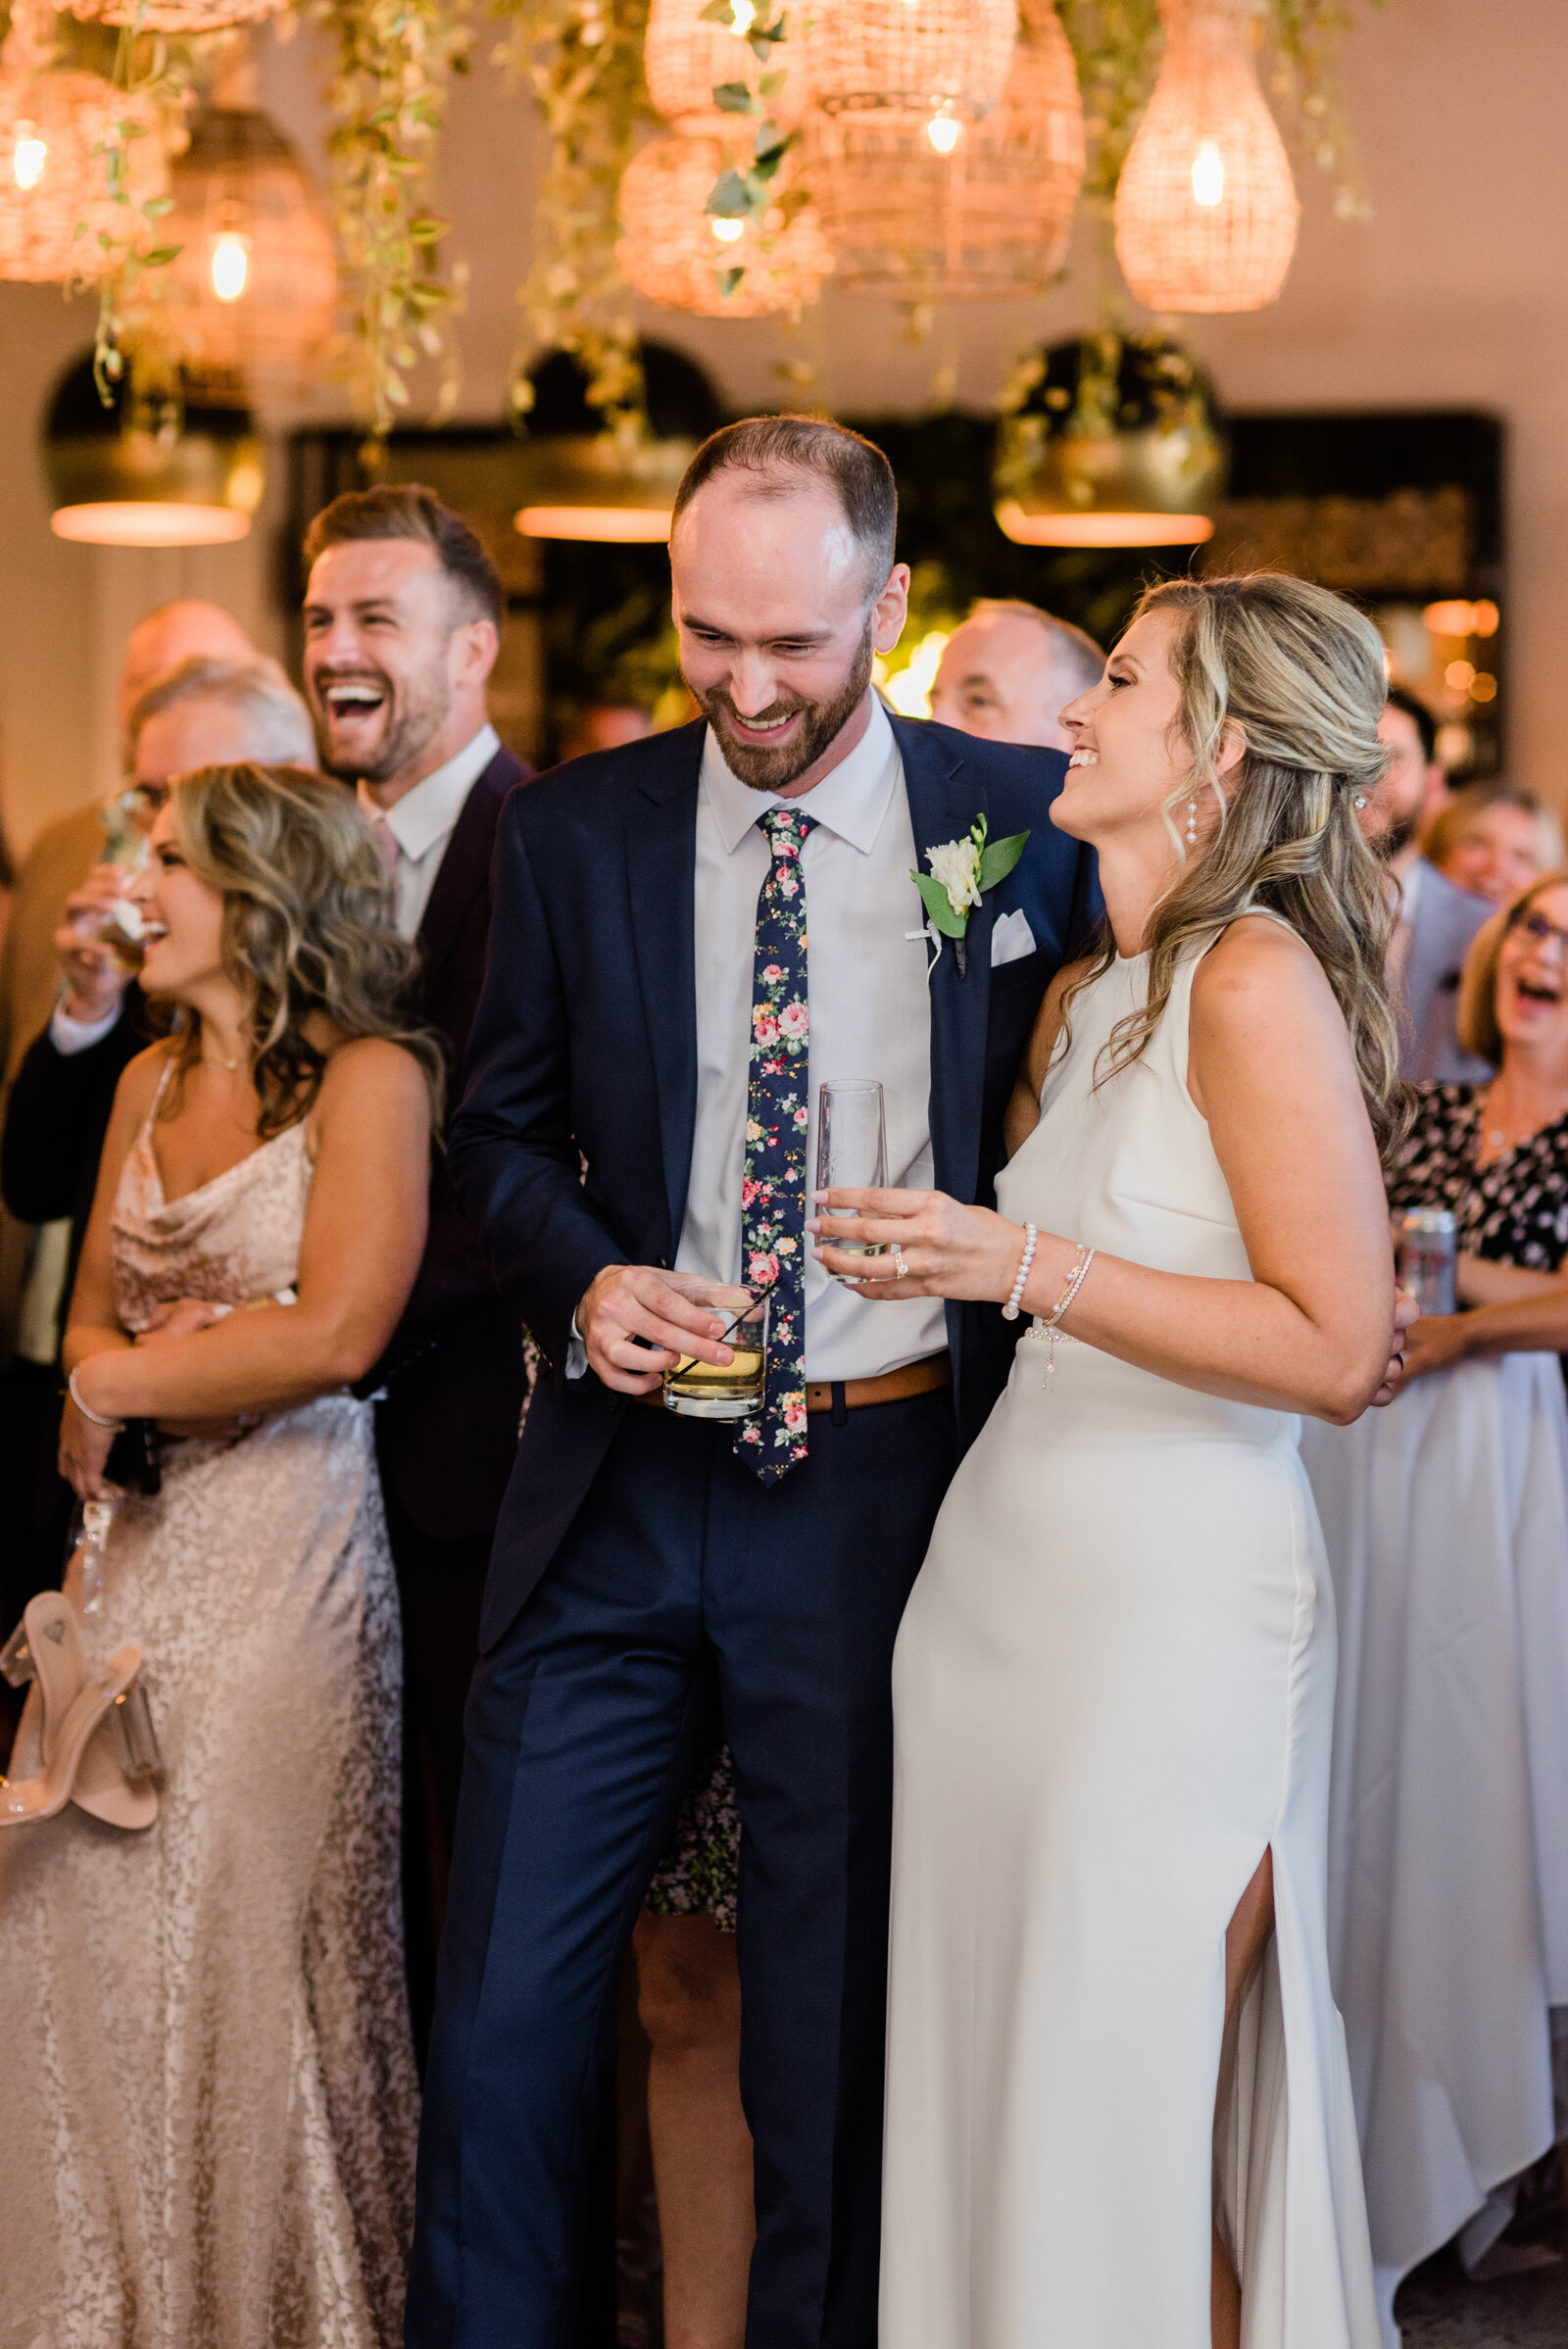 Wedding couple laughing and holding drinks